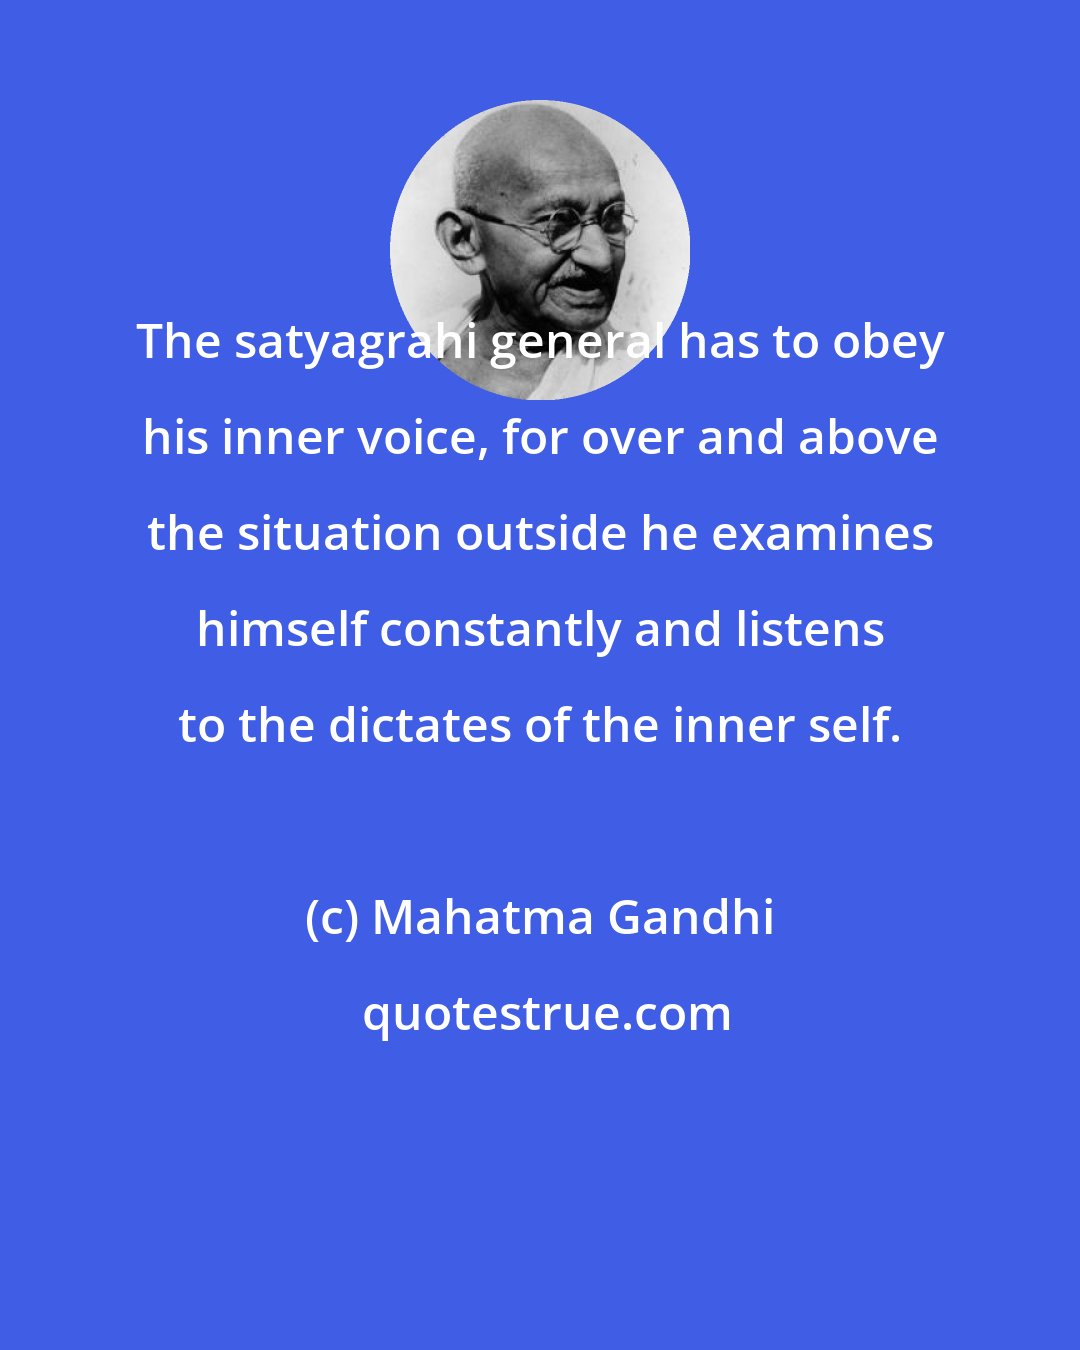 Mahatma Gandhi: The satyagrahi general has to obey his inner voice, for over and above the situation outside he examines himself constantly and listens to the dictates of the inner self.